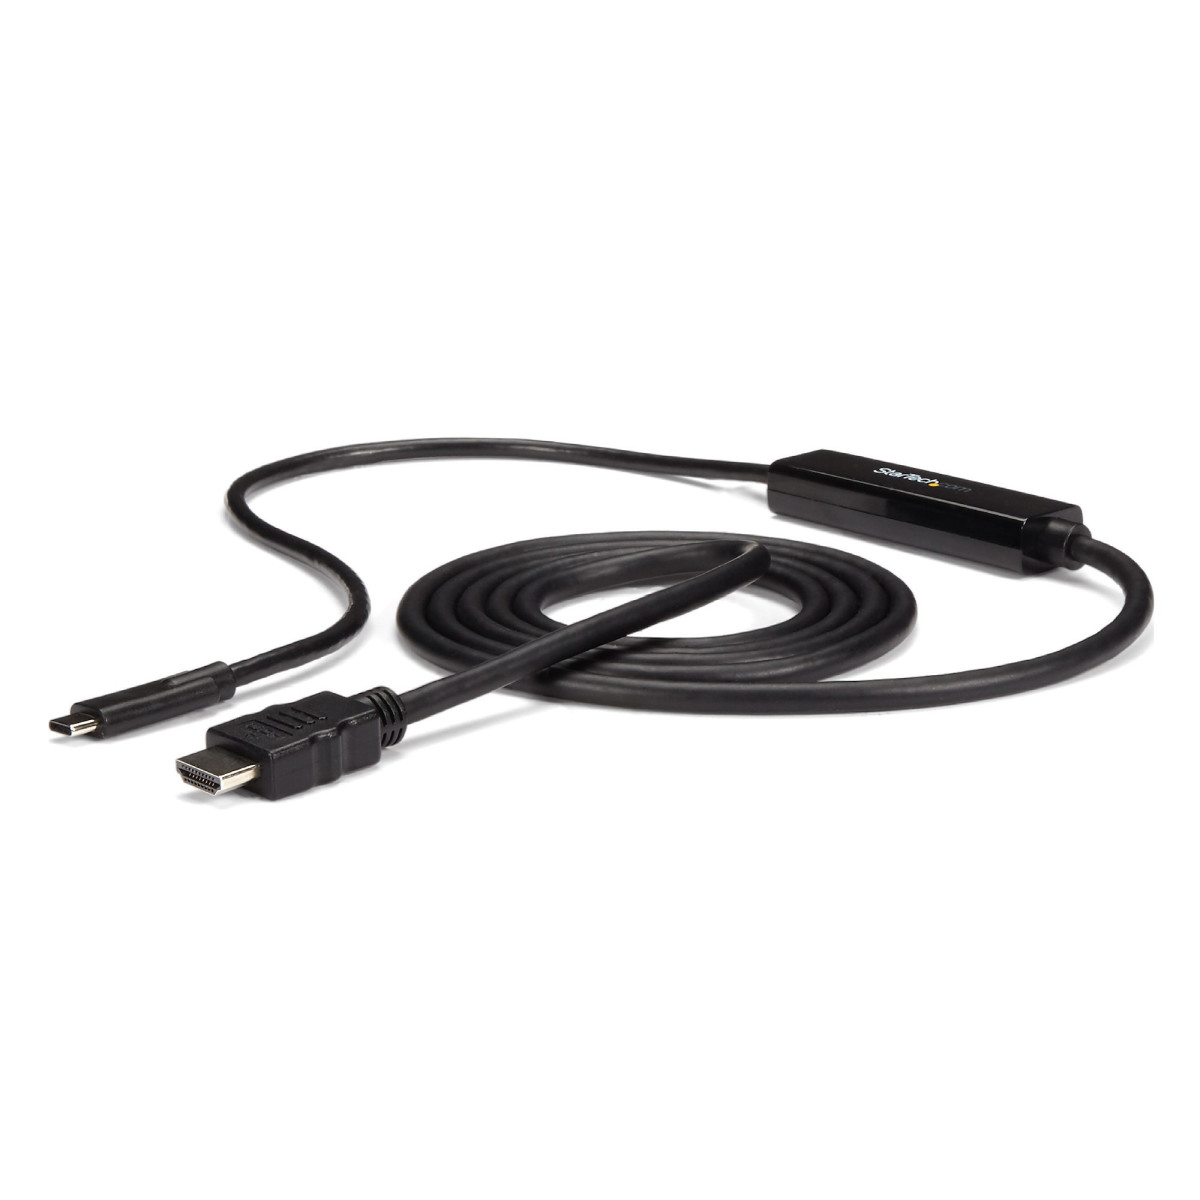 2m USB-C to HDMI Adapter Cable - 4K 30Hz